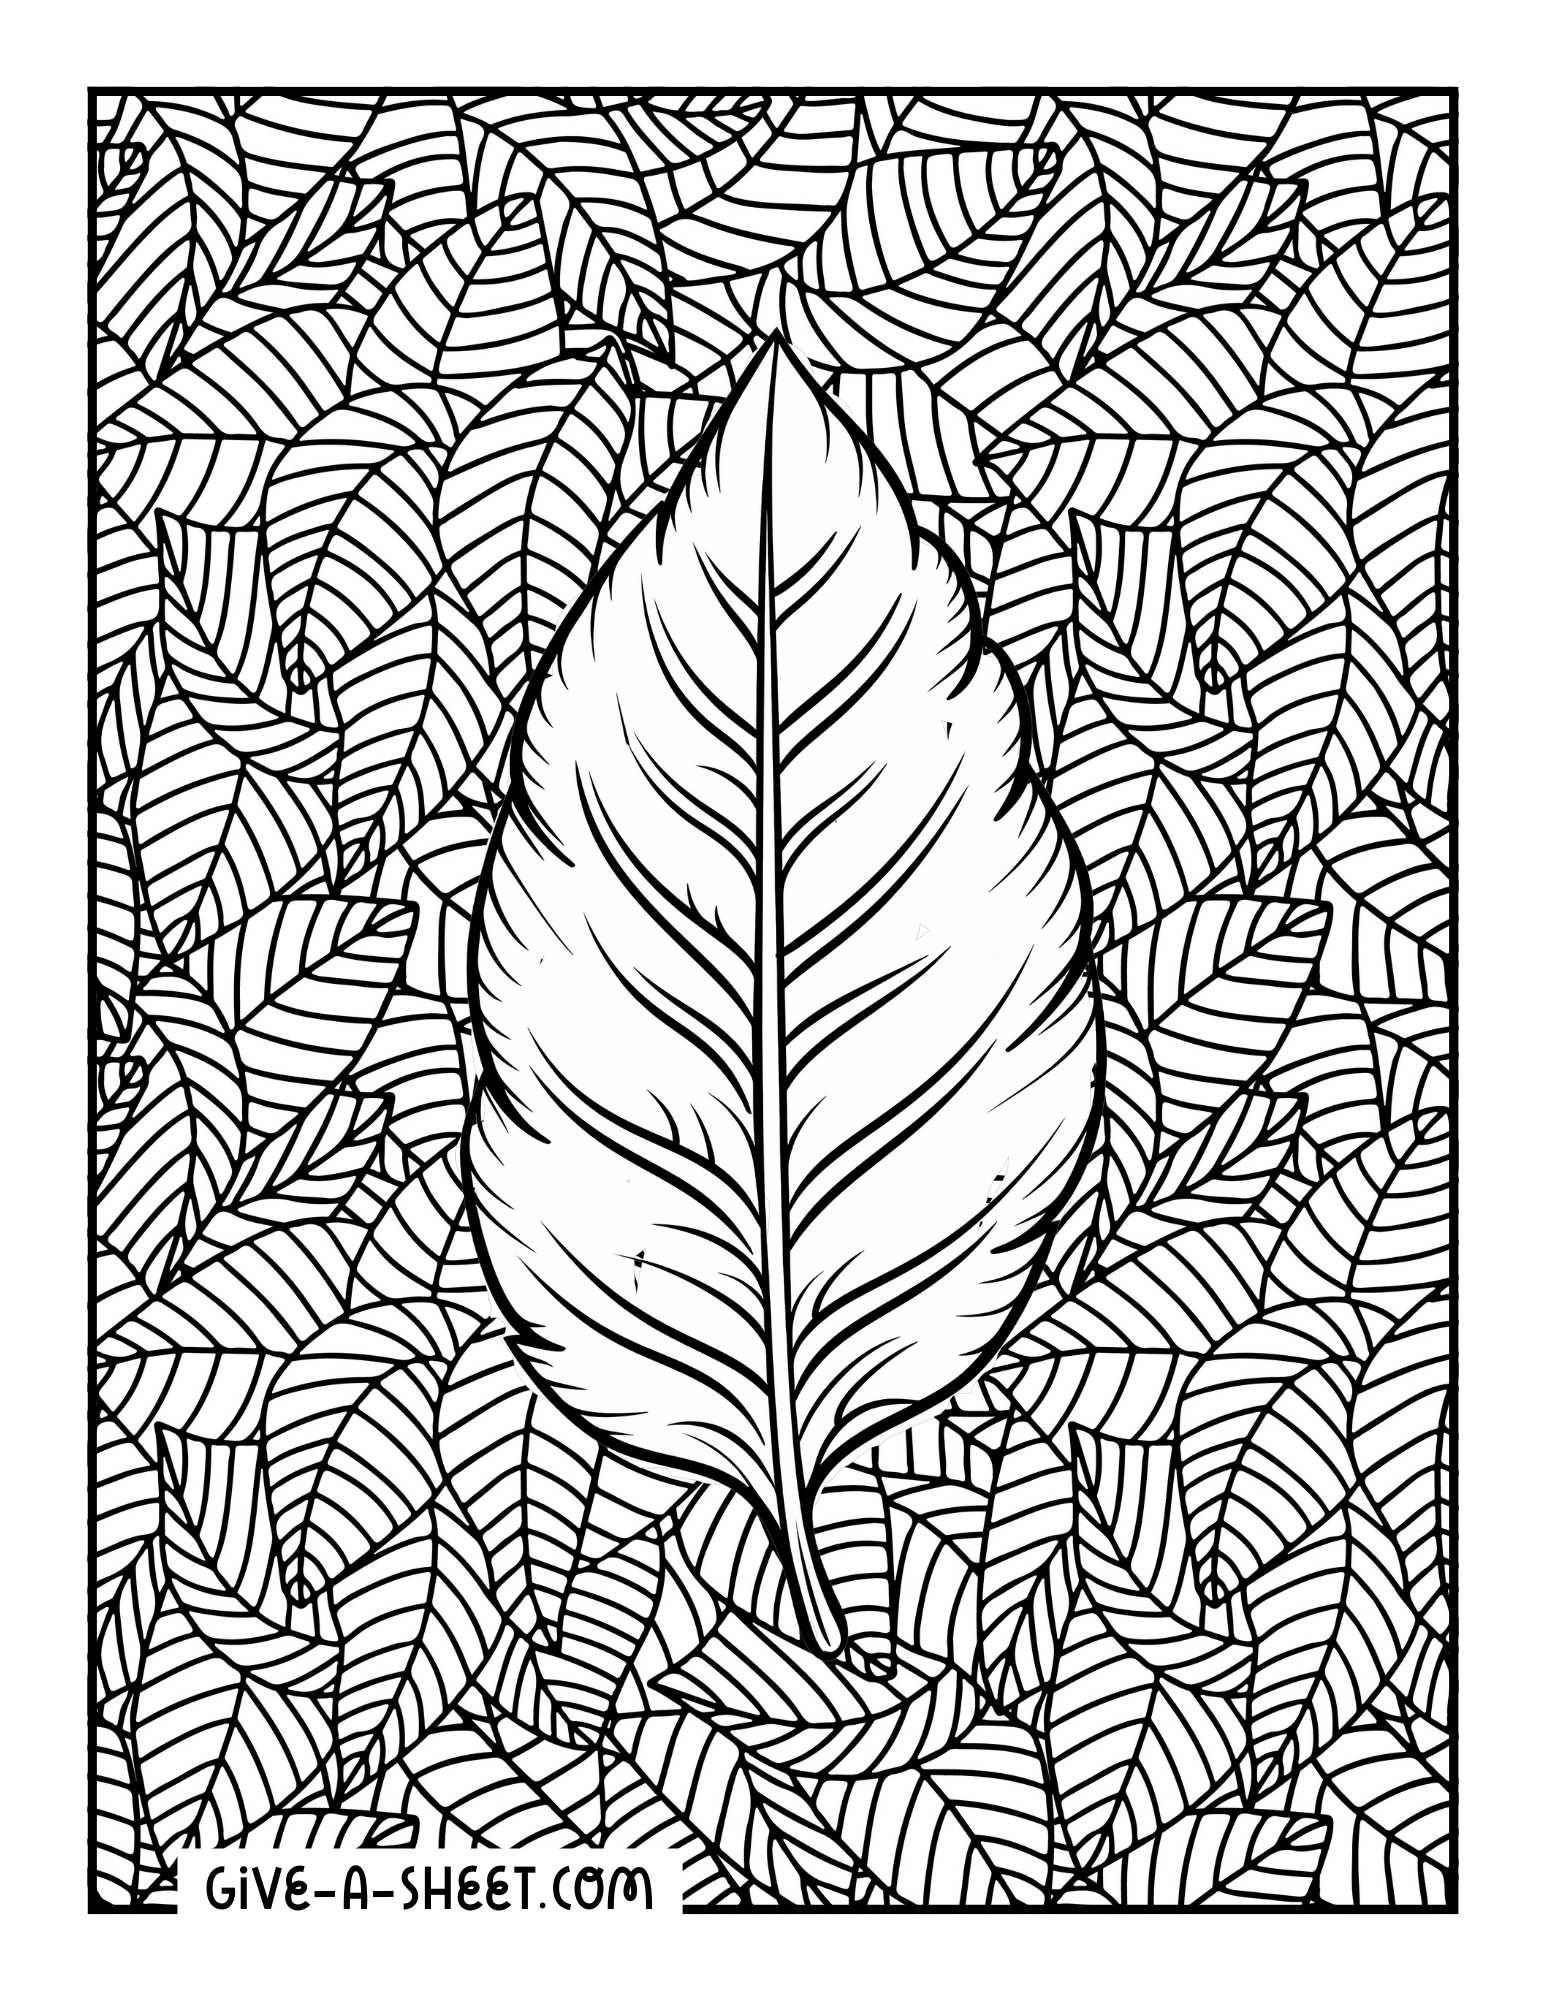 Intricate designs for fall season leaves coloring page for adults.